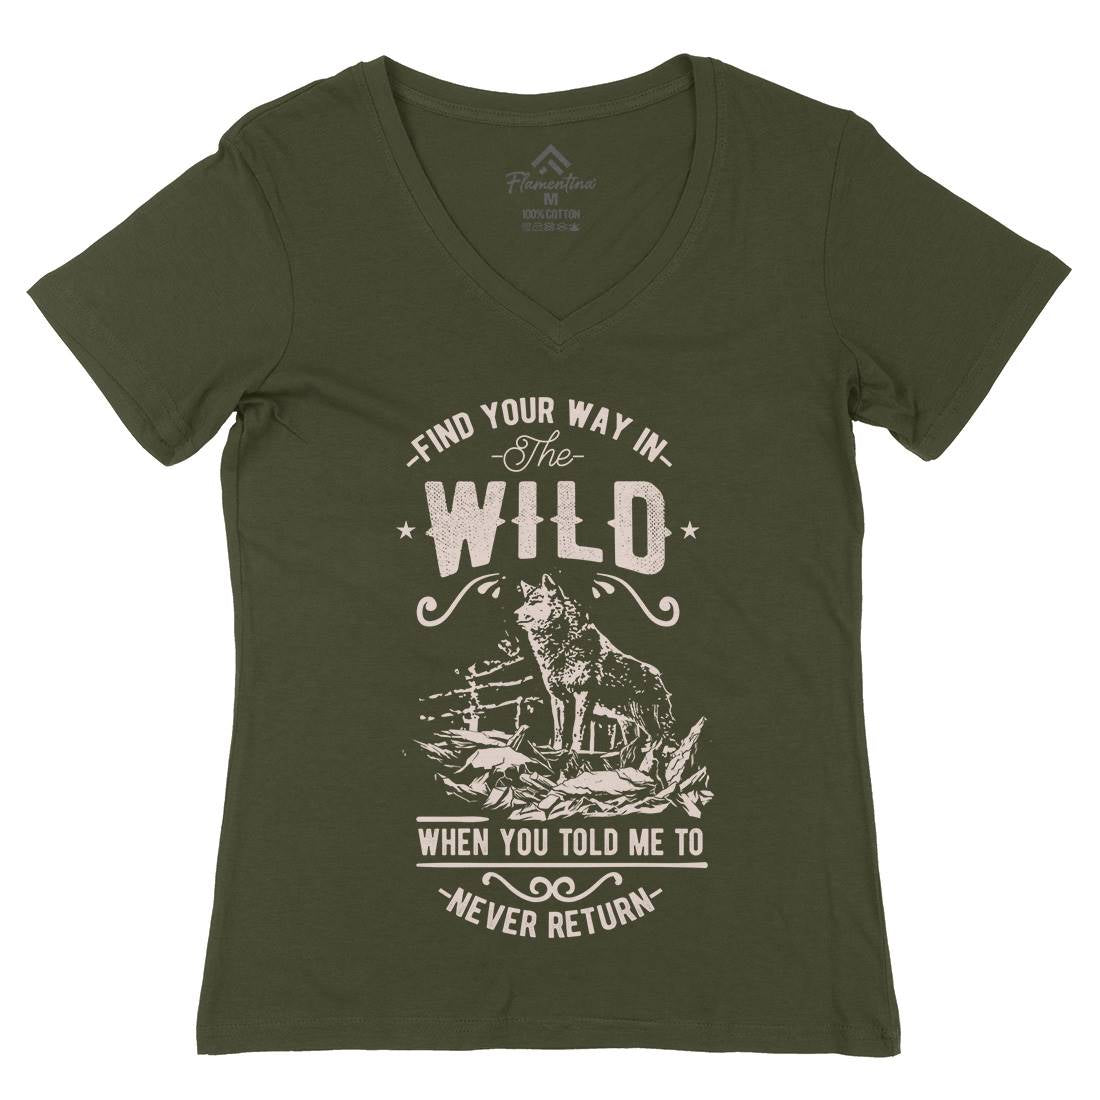 Find Your Way In The Wild Womens Organic V-Neck T-Shirt Nature C932